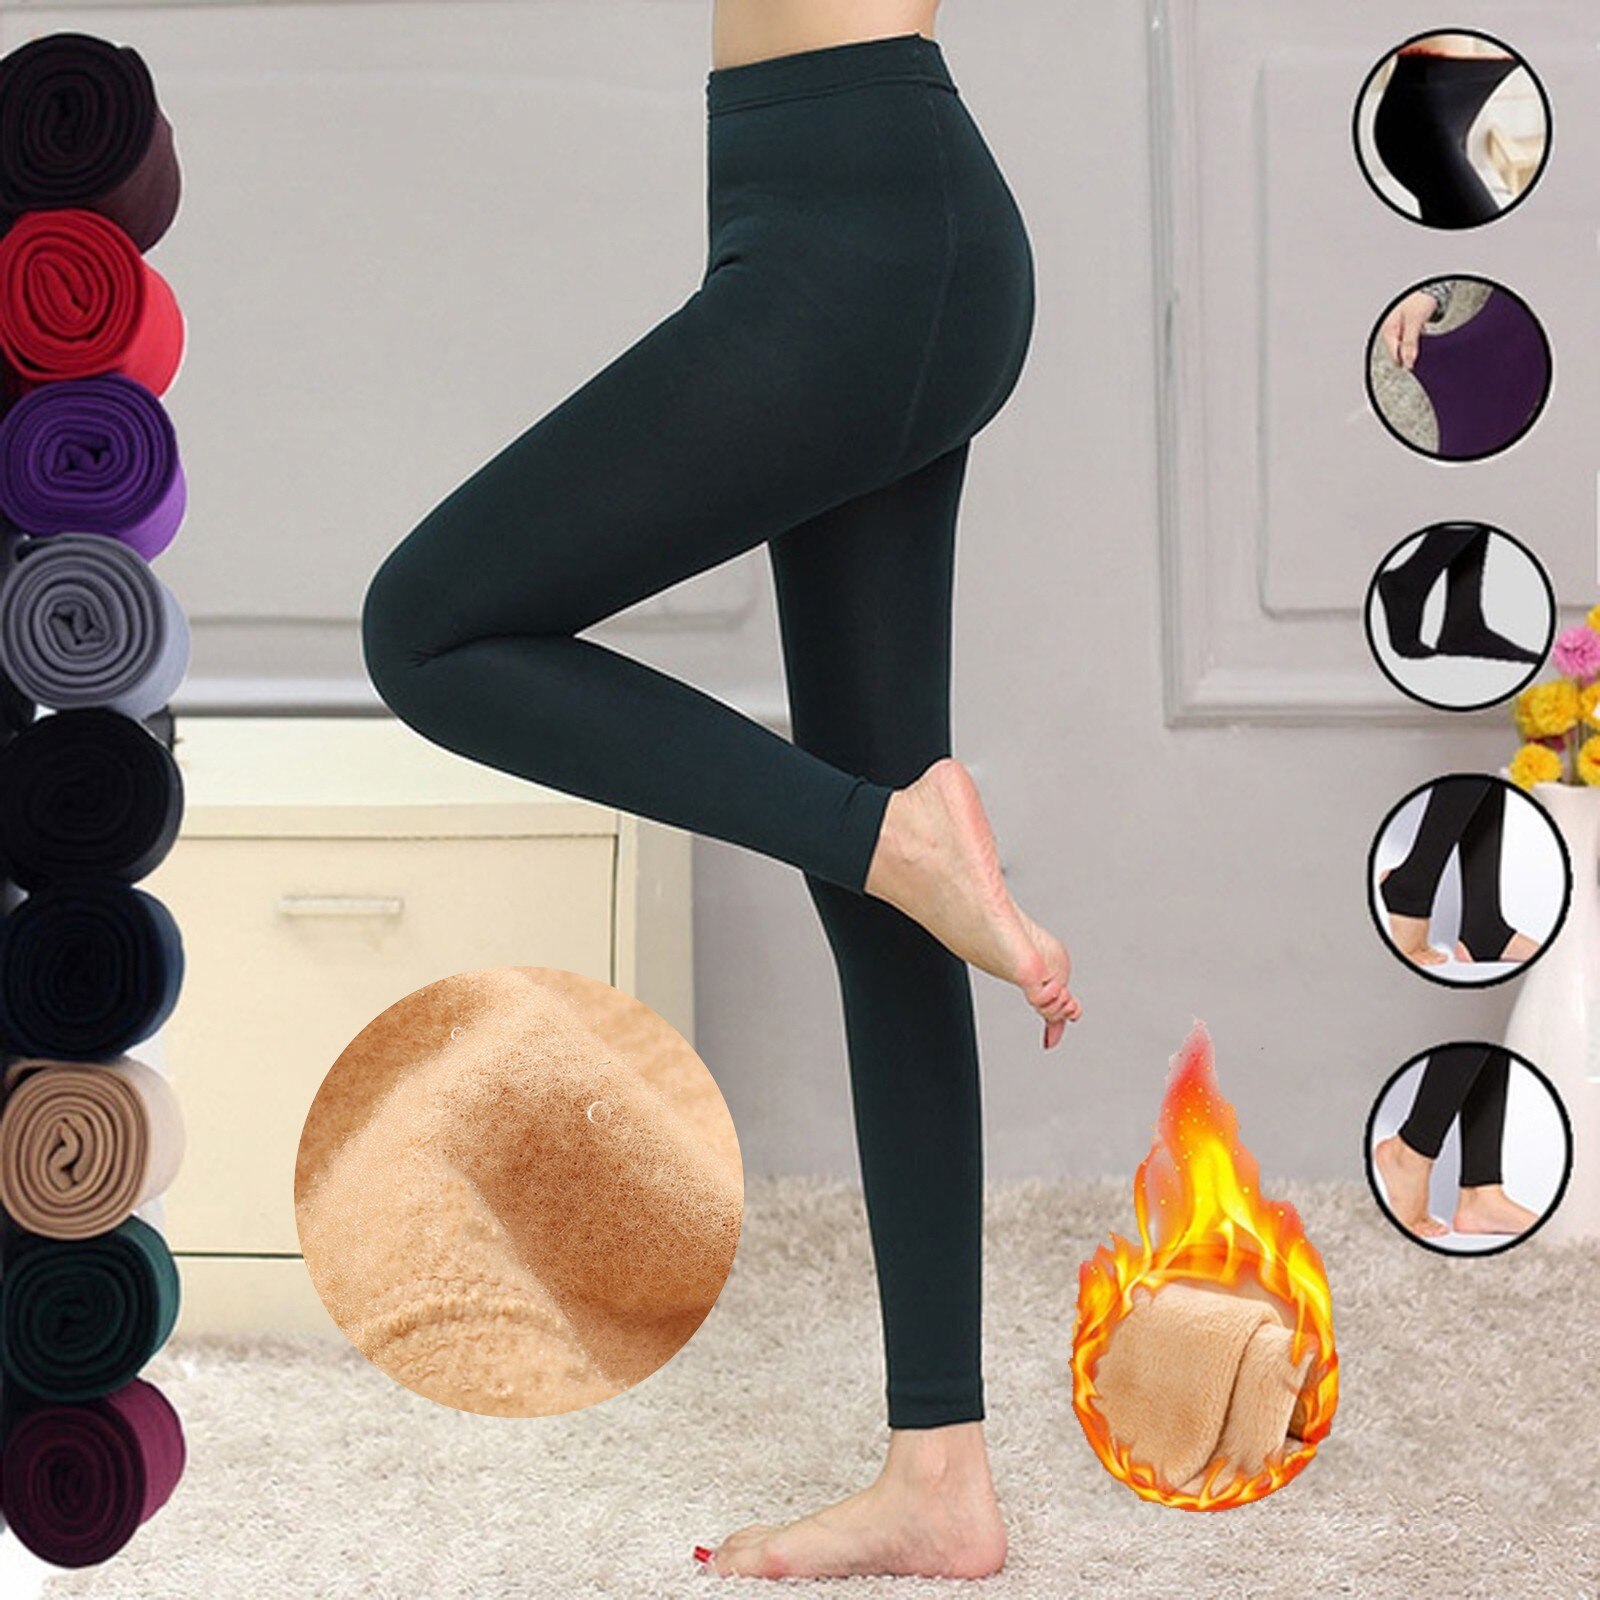 Ladies Winter Warm Thick Tights Thermal Leggings Fleece Lined